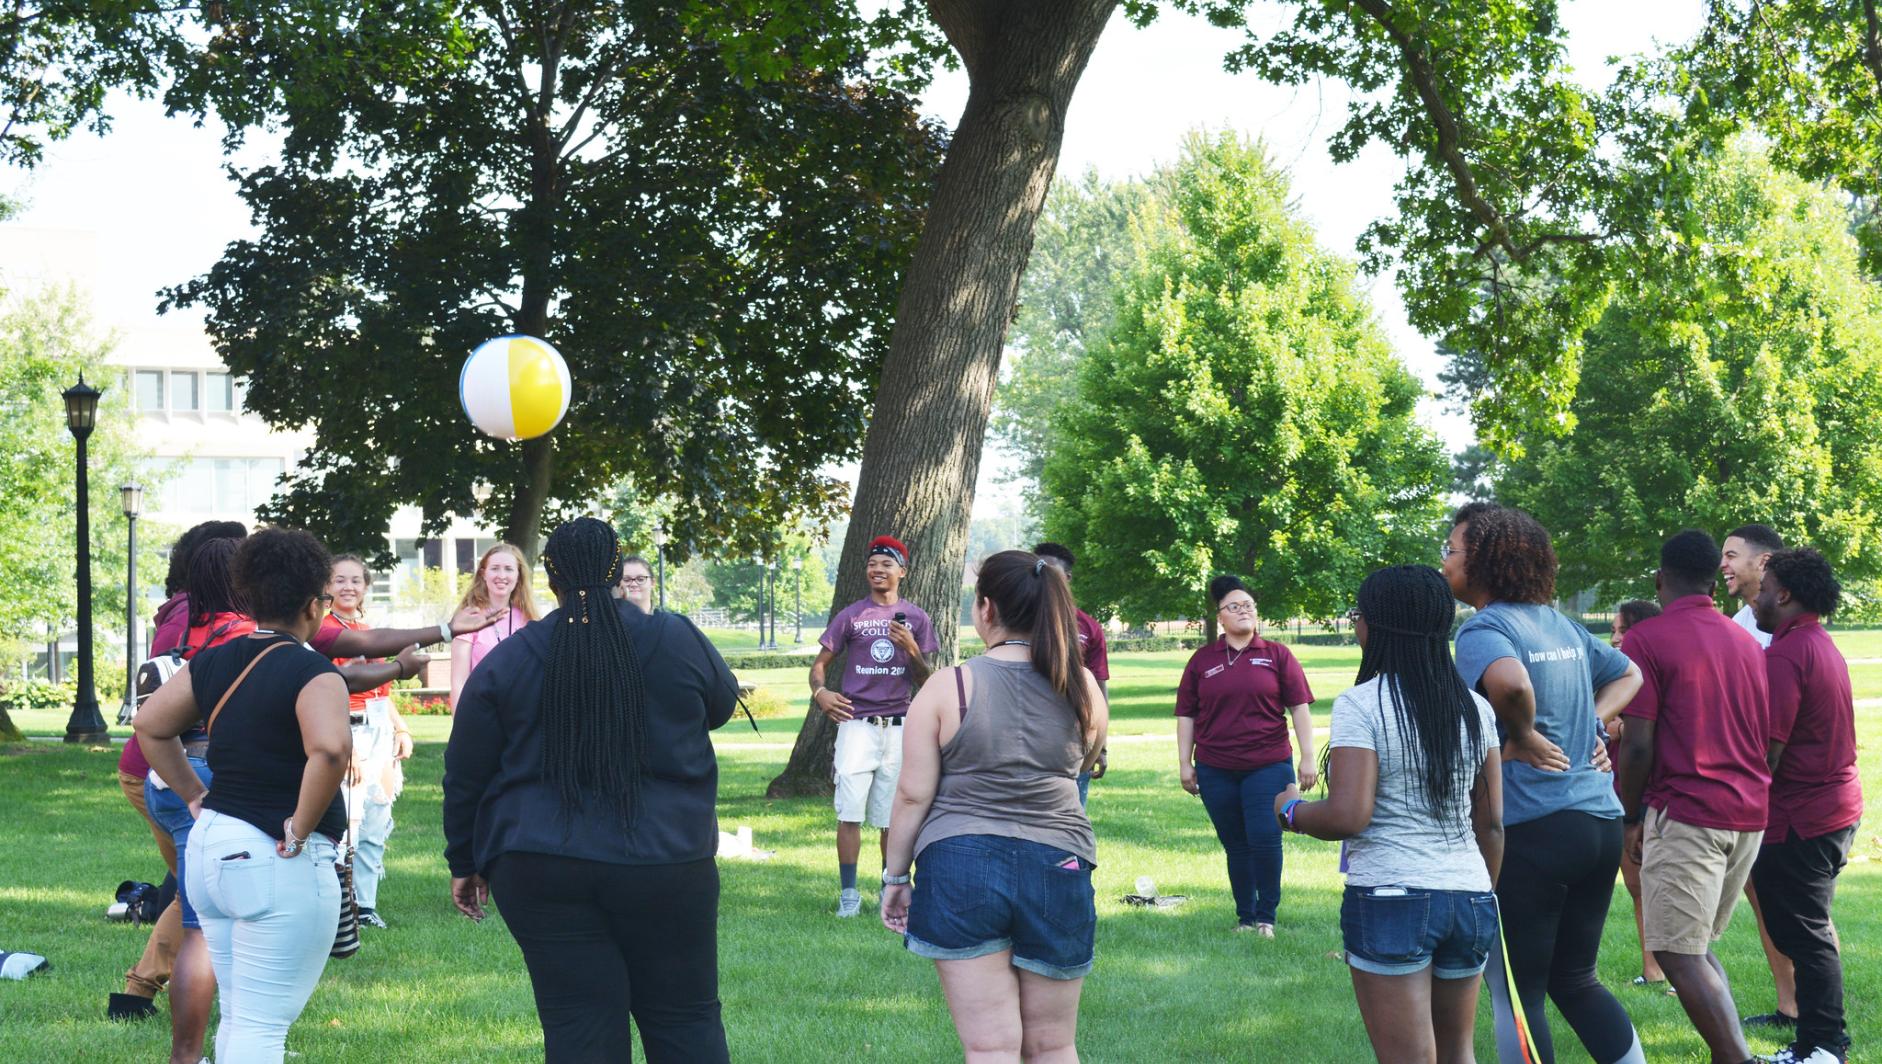 Cultural Connections group plays with a beachball on Naismith Green as part of Orientation